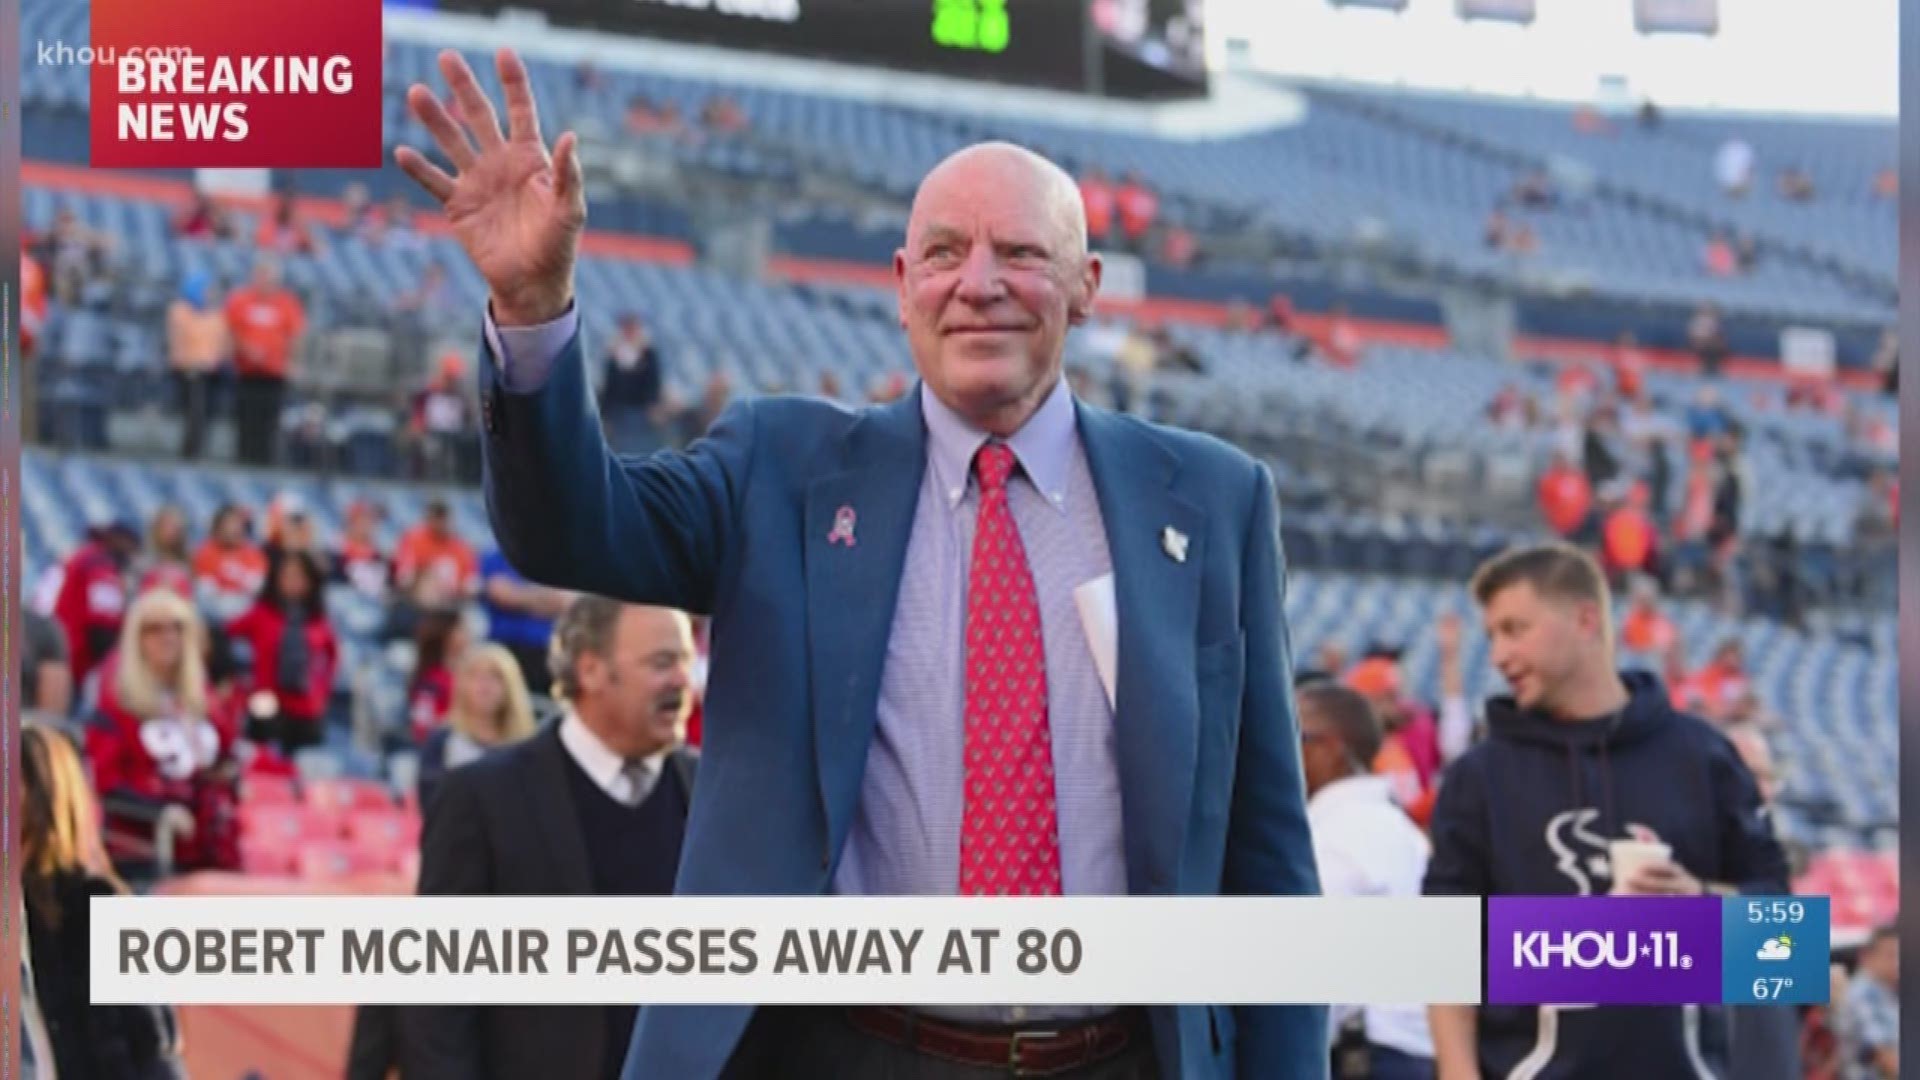 Houston Texans Founder and Chief Executive Officer Robert C. McNair passed away Friday at the age of 81. The Texans tweeted McNair died peacefully in Houston with his wife Janice and his family by his side.